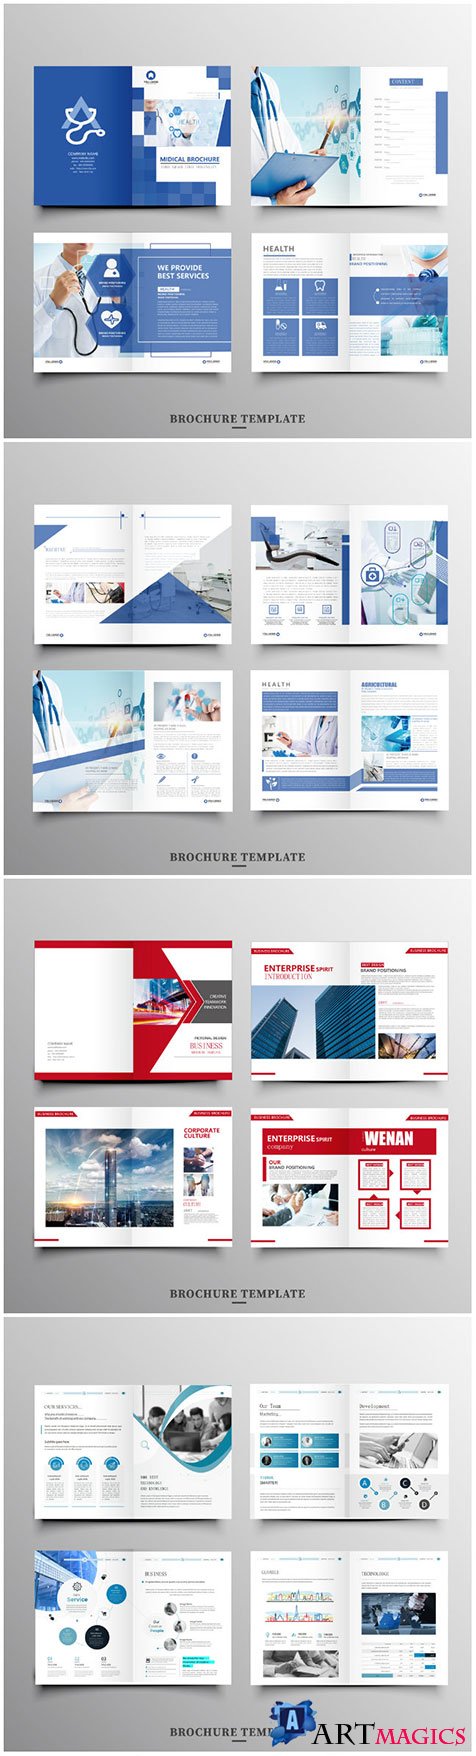 Brochure template vector layout design, corporate business annual report, magazine, flyer mockup # 242